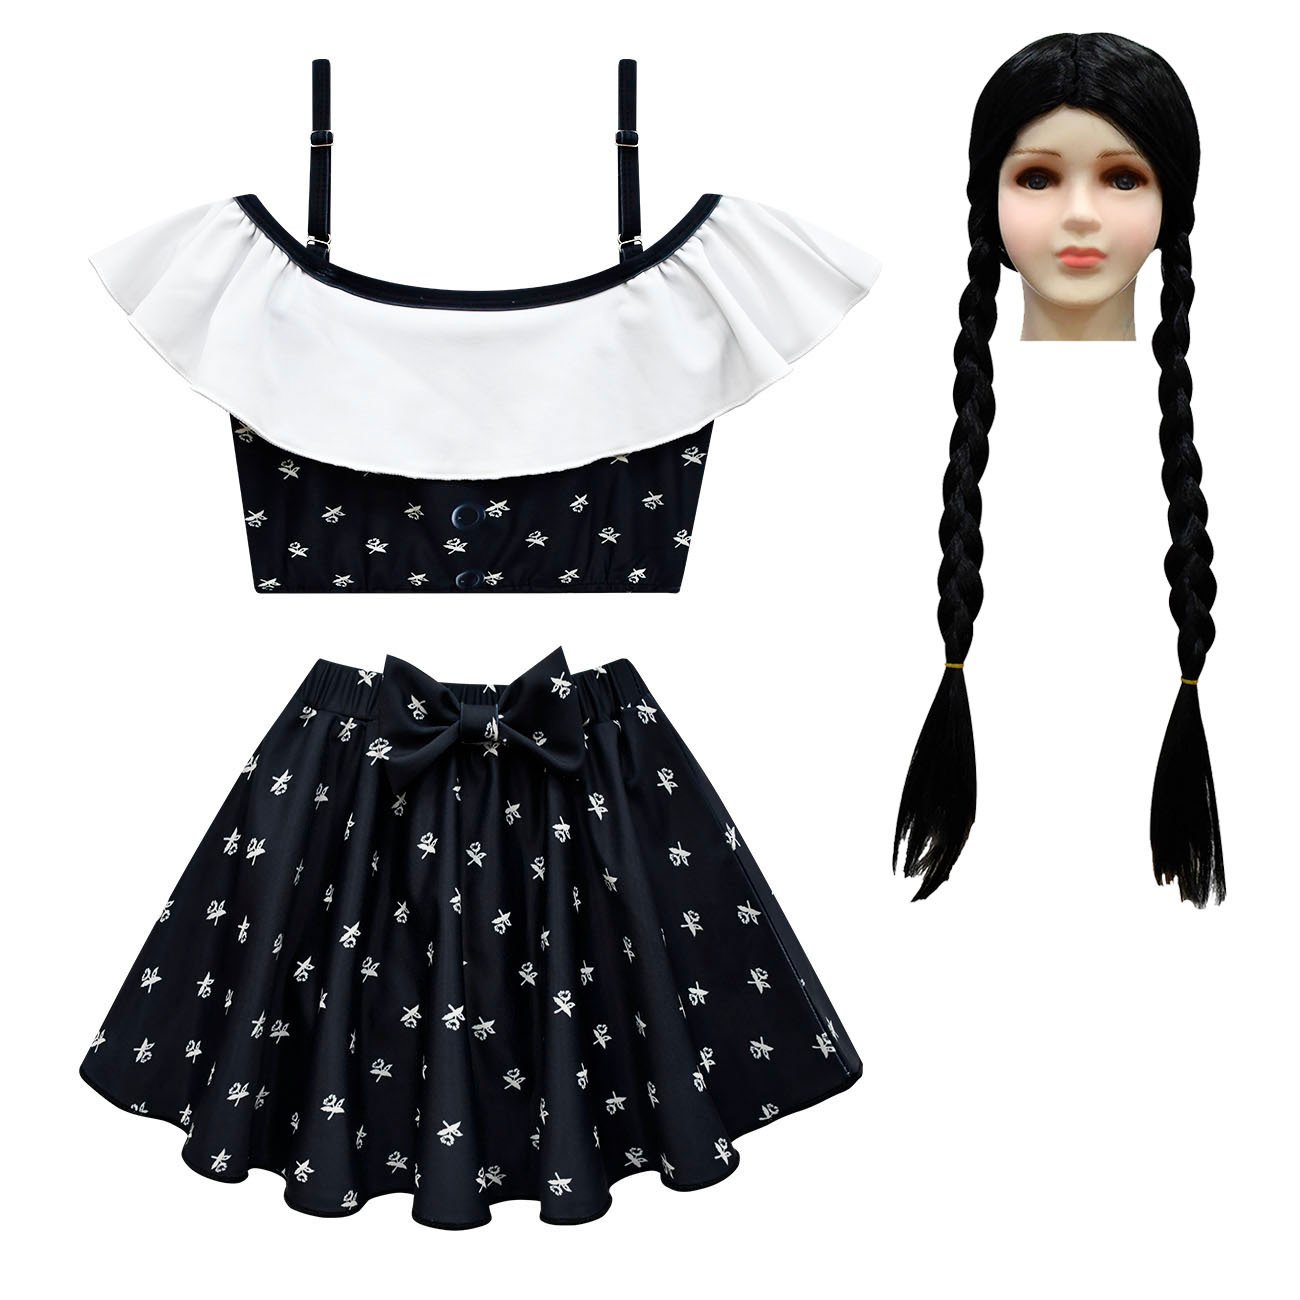 Wednesday Costume The Addams Family Cosplay Suspender Swimsuit Set For Kids-Pajamasbuy